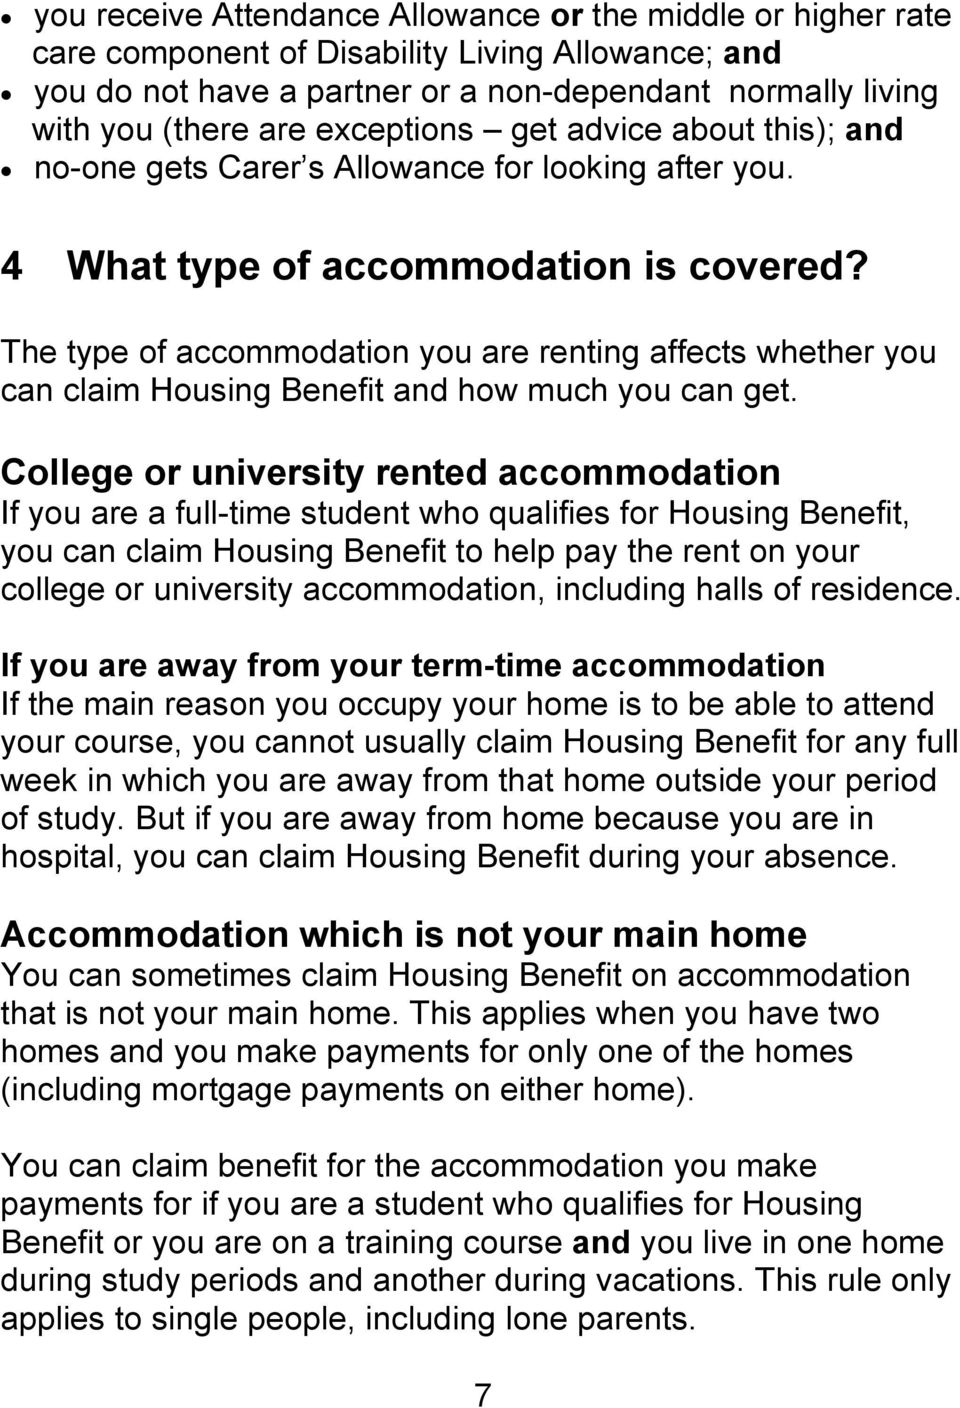 The type of accommodation you are renting affects whether you can claim Housing Benefit and how much you can get.